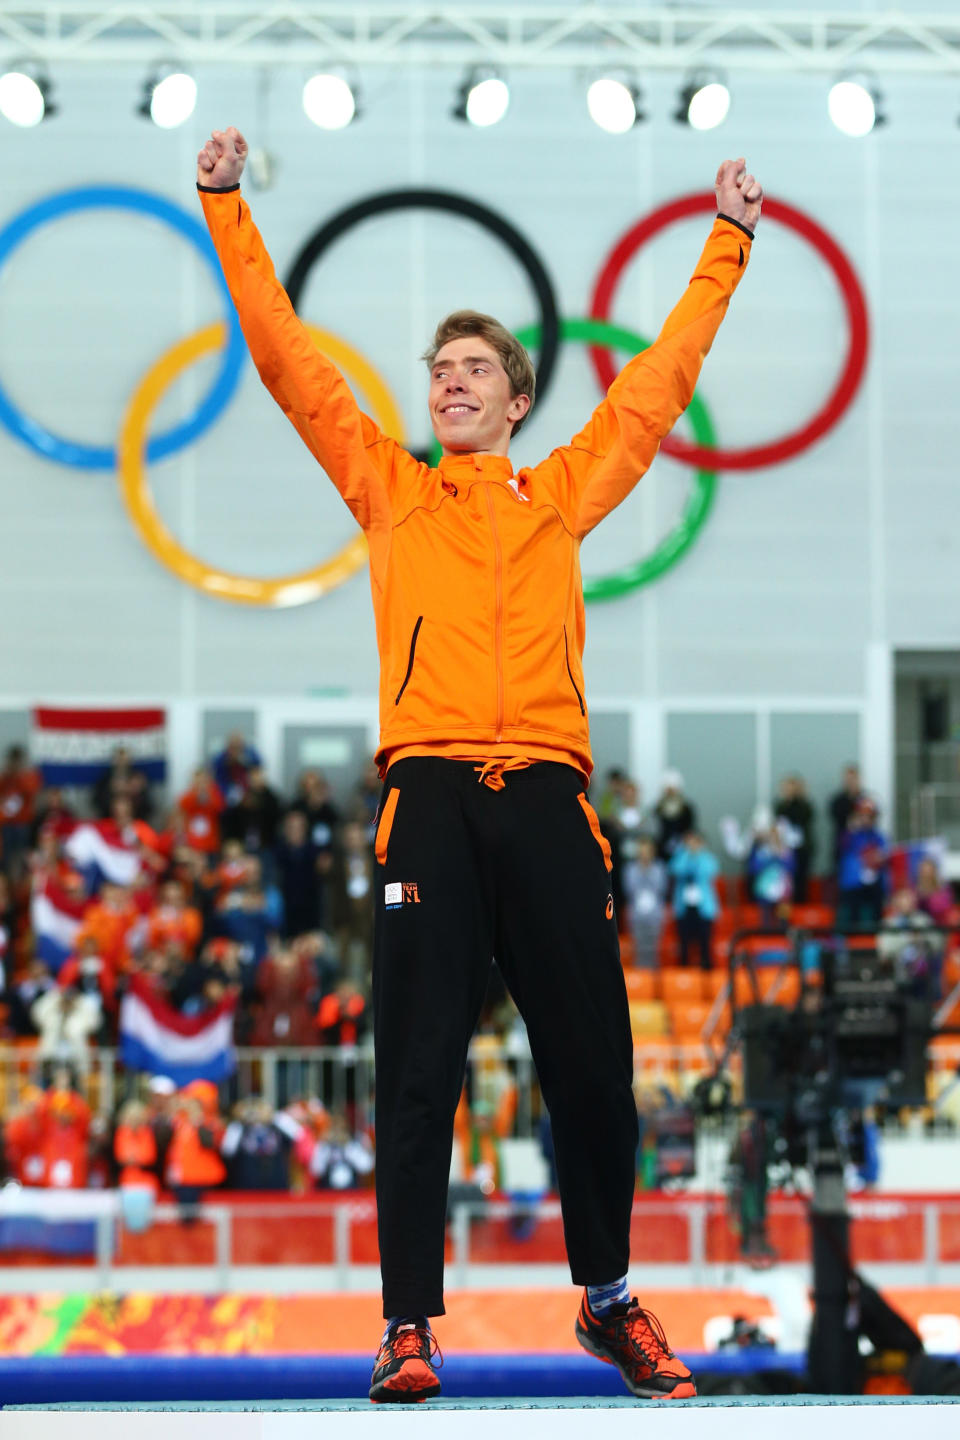 SOCHI, RUSSIA - FEBRUARY 18:  Gold medalist Jorrit Bergsma of the Netherlands celebrates during the flower ceremony for the Men's 10000m Speed Skating event on day eleven of the Sochi 2014 Winter Olympics at Adler Arena Skating Center on February 18, 2014 in Sochi, Russia.  (Photo by Quinn Rooney/Getty Images)